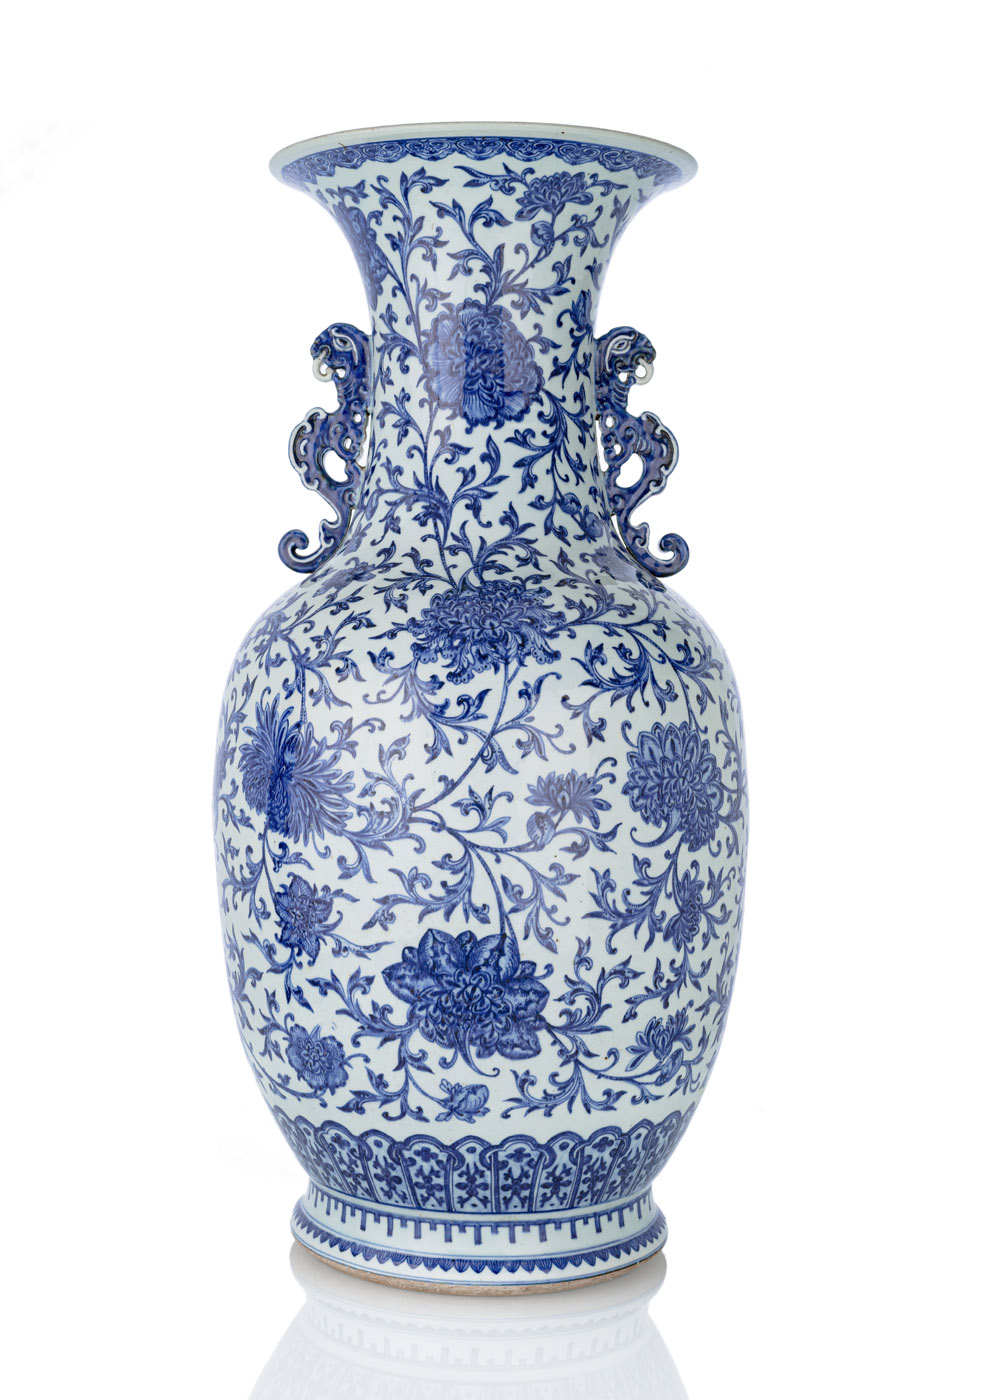 A LARGE BLUE AND WHITE LOTUS TWIN-BIRD-HANDLED PORCELAIN VASE